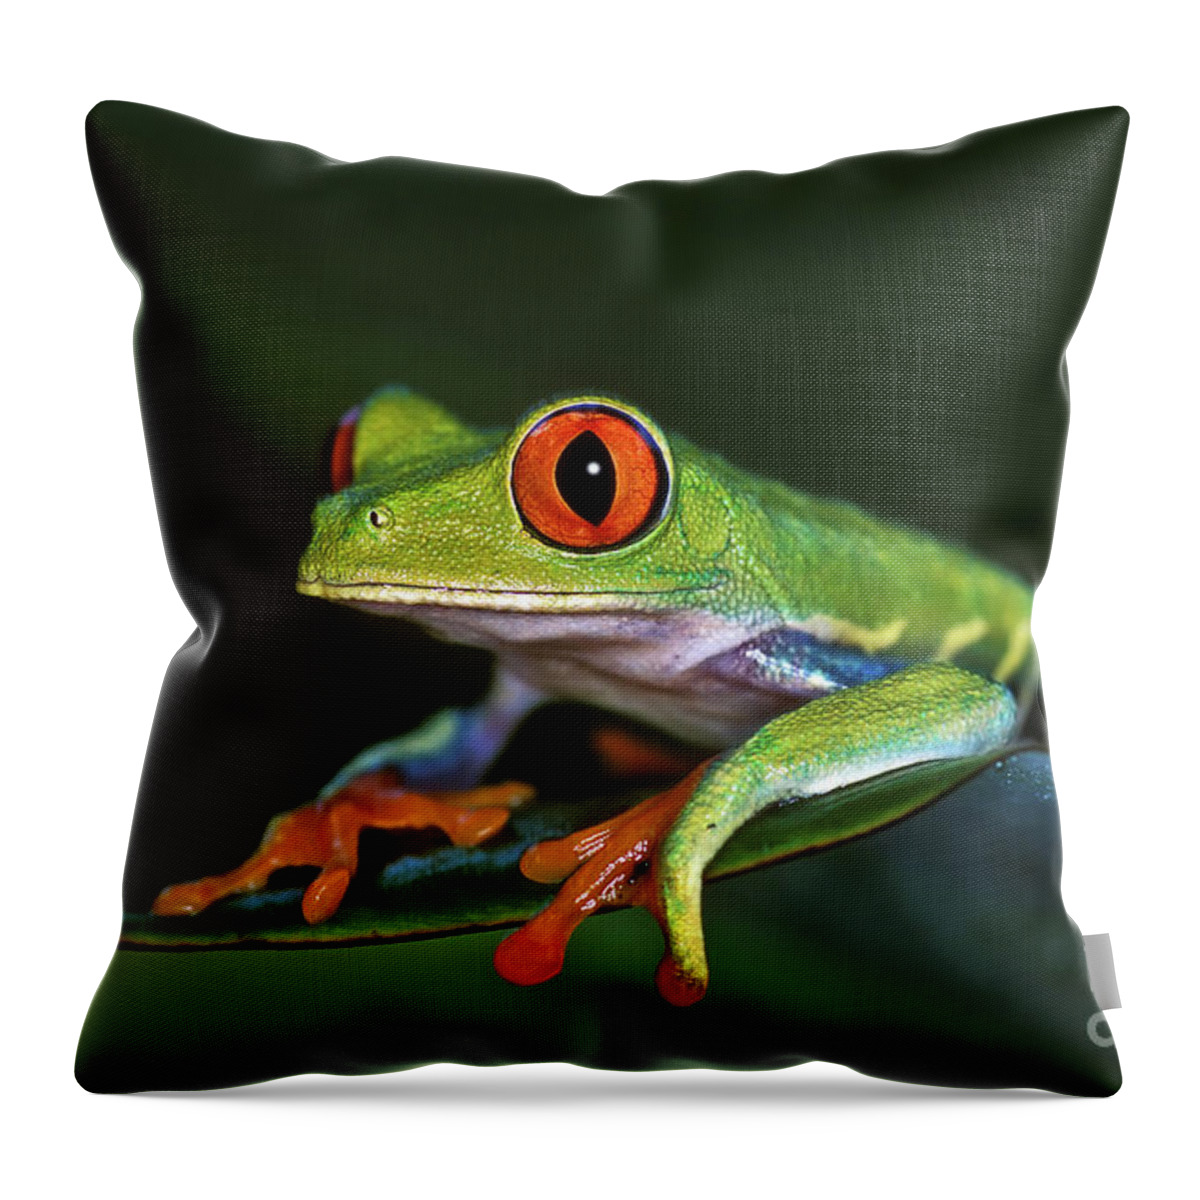 Costa Rica Throw Pillow featuring the photograph Gaudy Leaf Frog - Costa Rica by Henk Meijer Photography